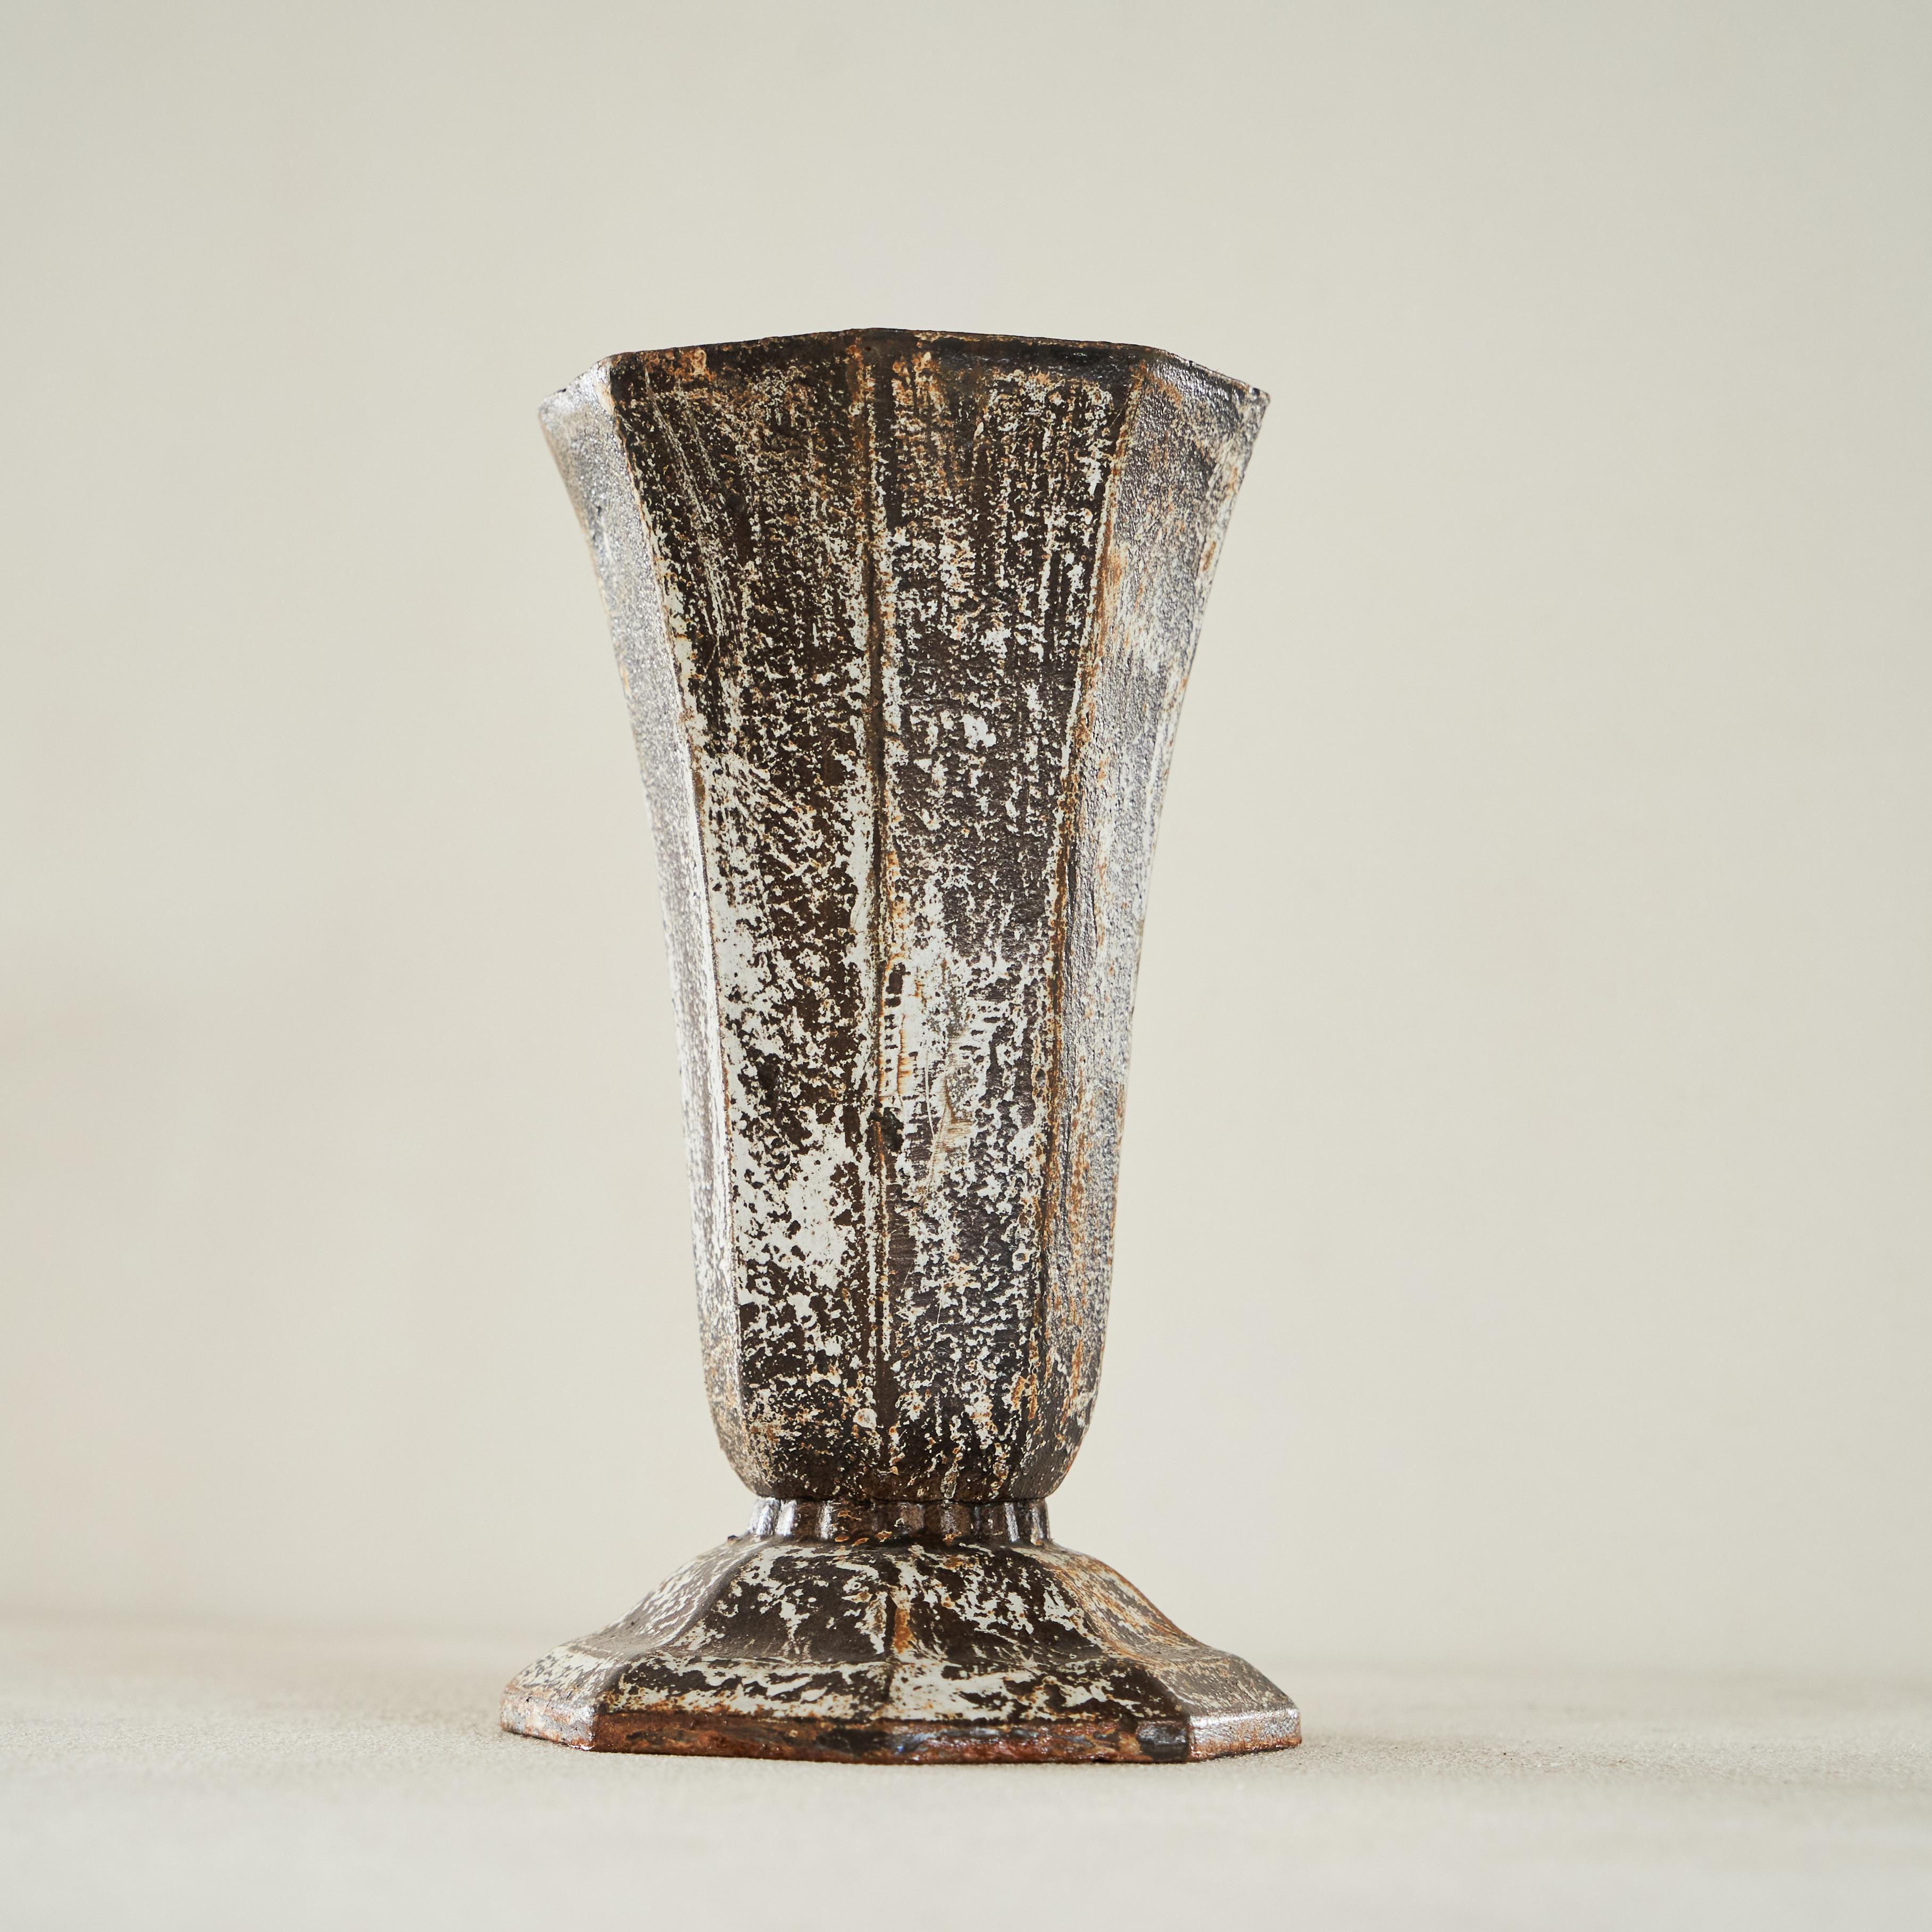 Art Deco Vase in Patinated an Rusted Metal 1930s For Sale 2